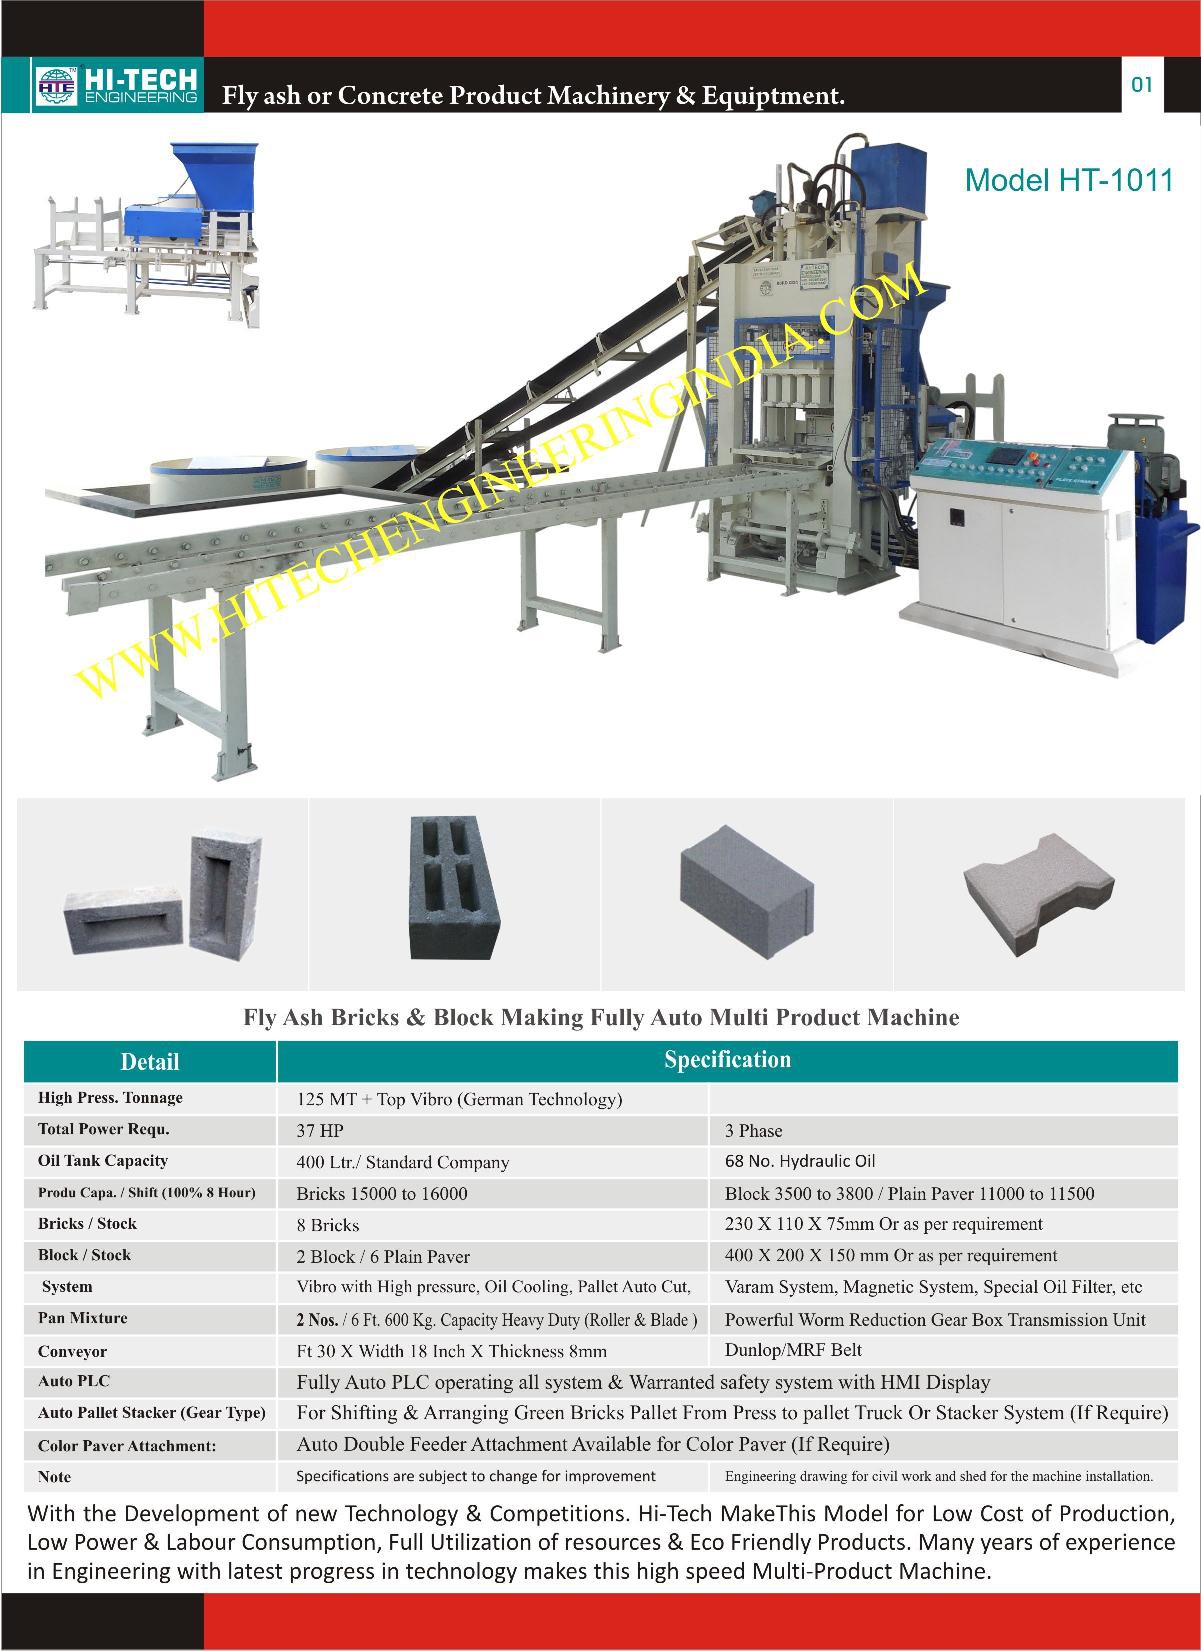 Fly ash bricks & Block making fully auto multi product machine from Hi Tech Engineering